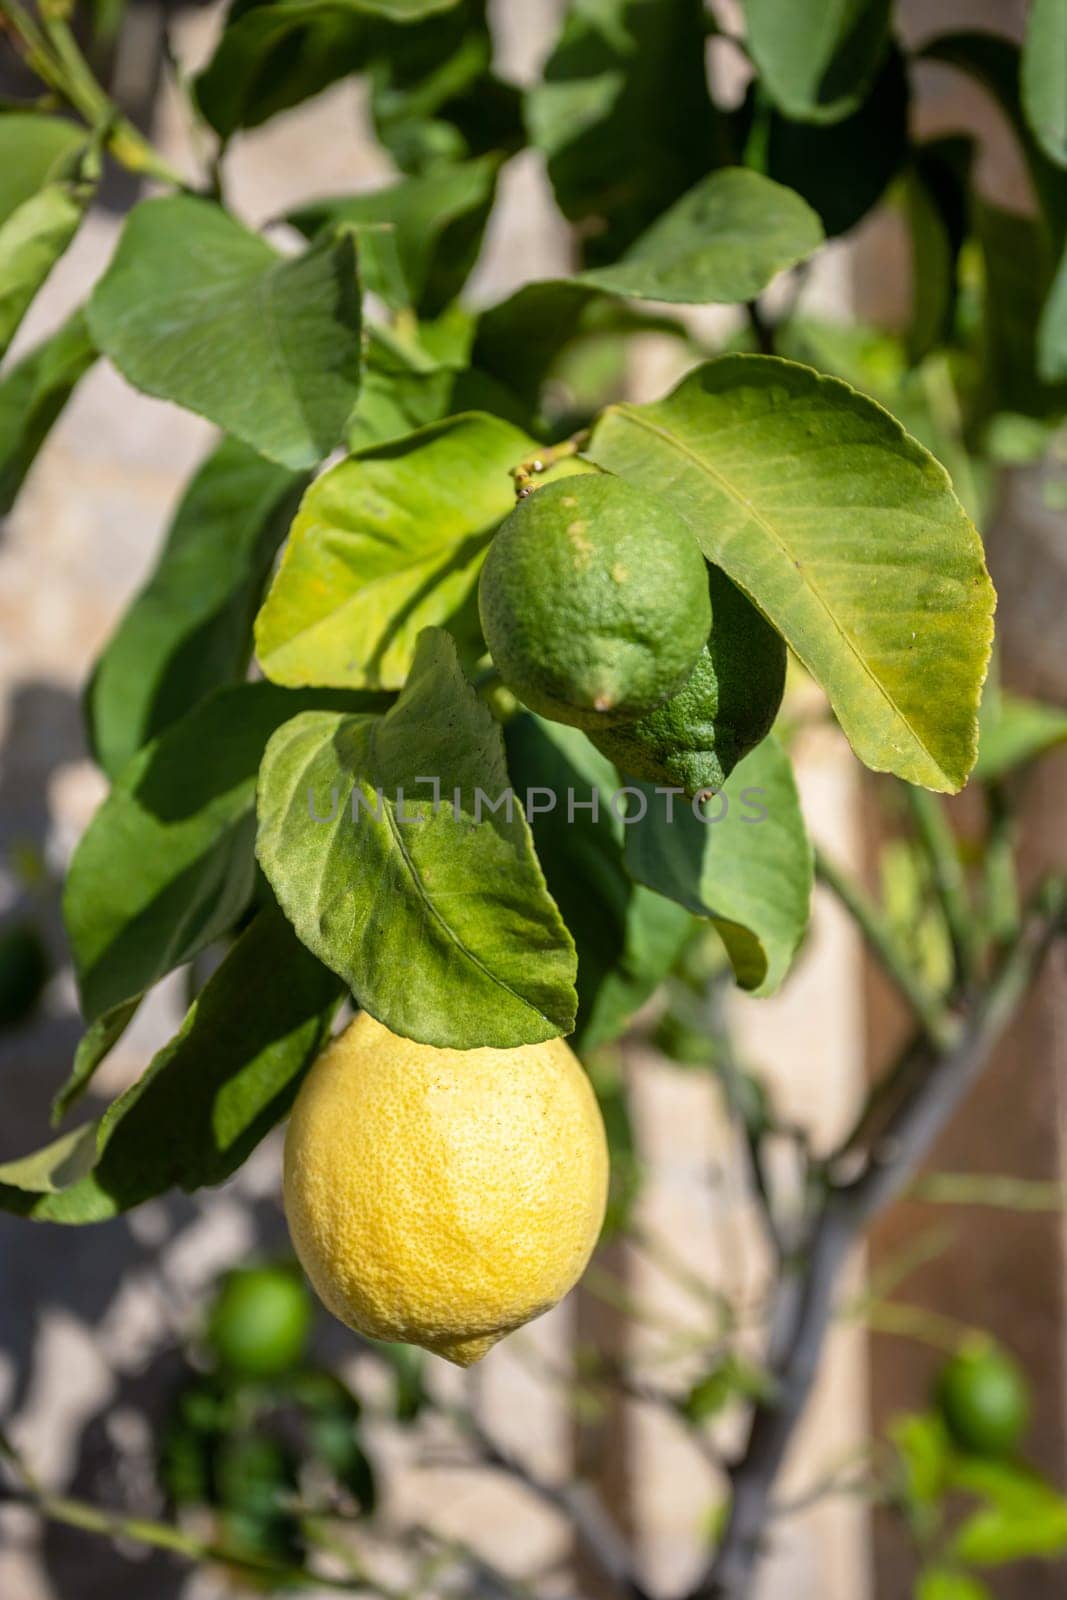 Fruit of lemon, on the branch. Nature. Healthy food.